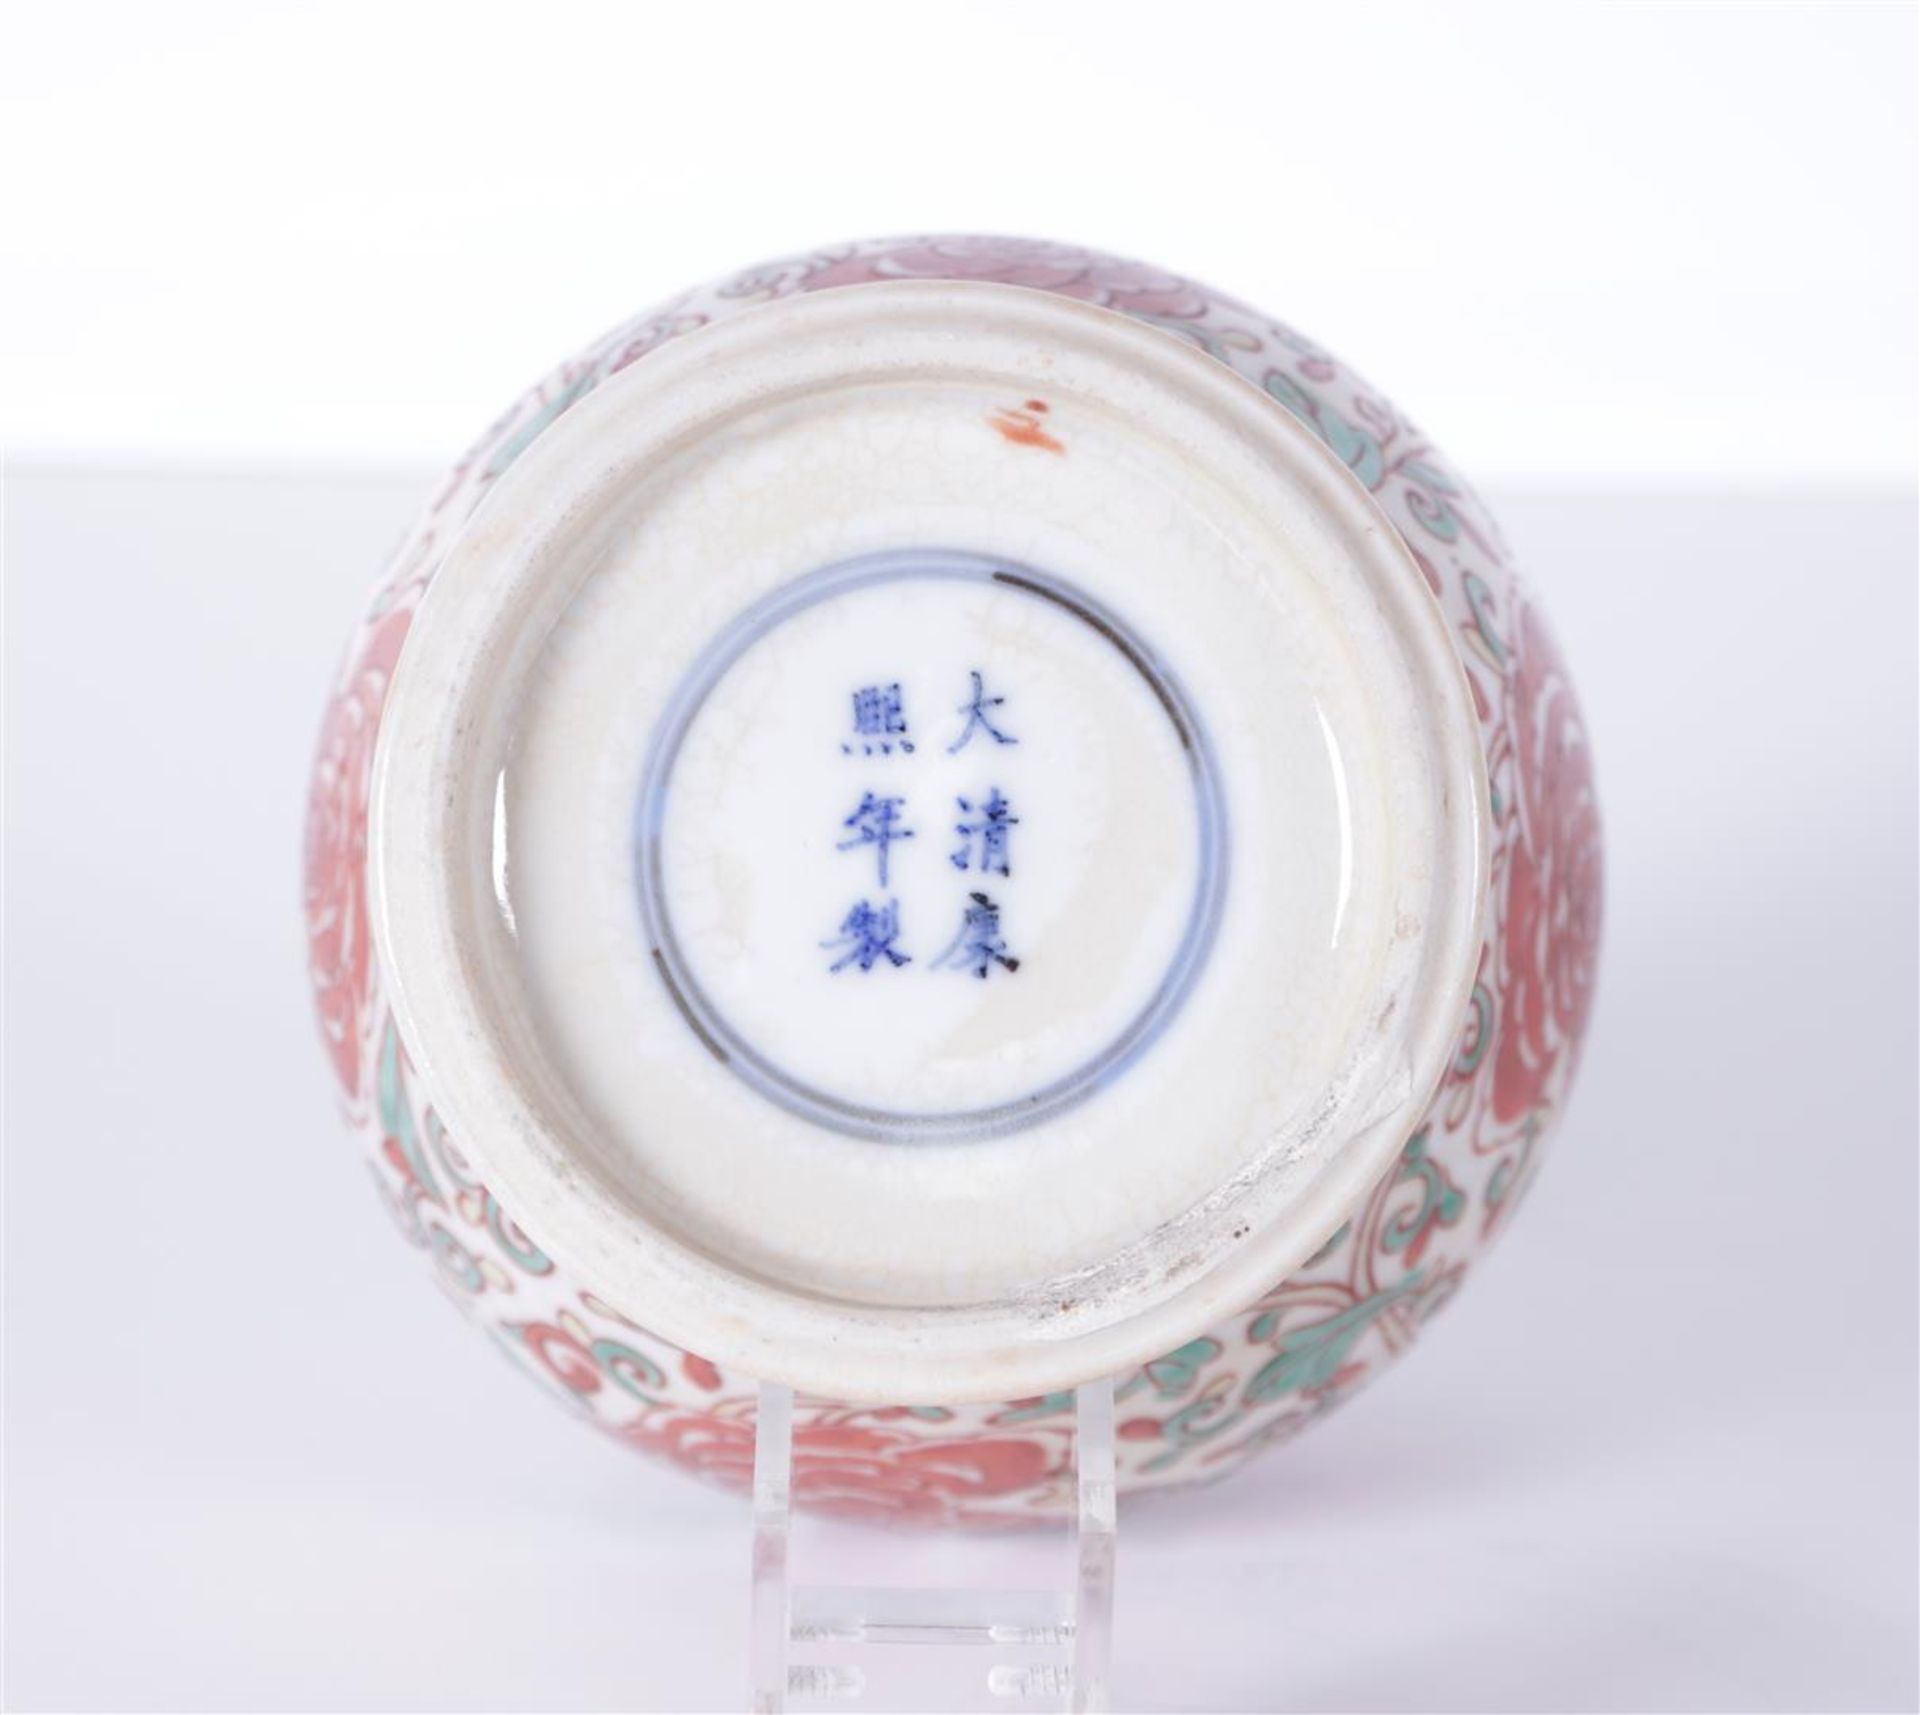 A porcelain lidded jar with floral decor, marked Kangxi. China, 19th century.
H. 25 cm. - Image 2 of 5